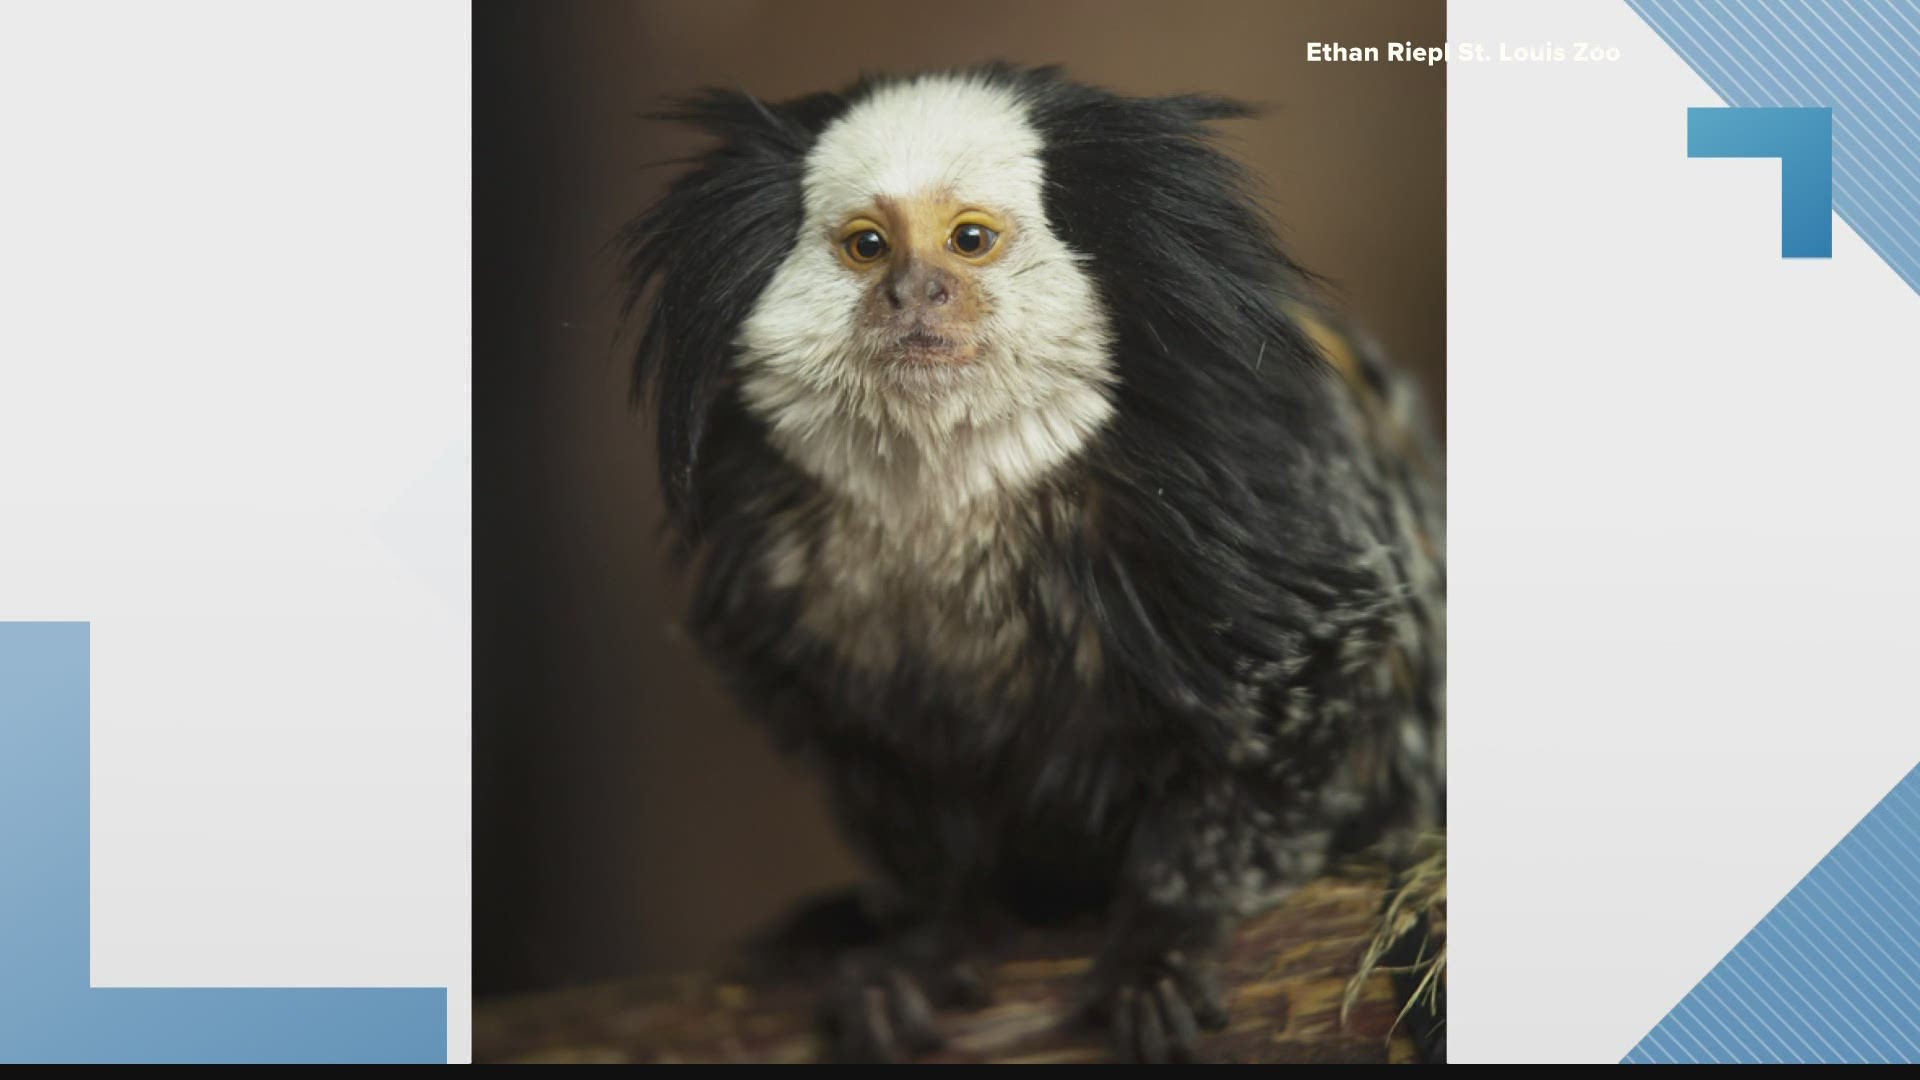 They are Geoffroy's marmosets, a new species to the zoo